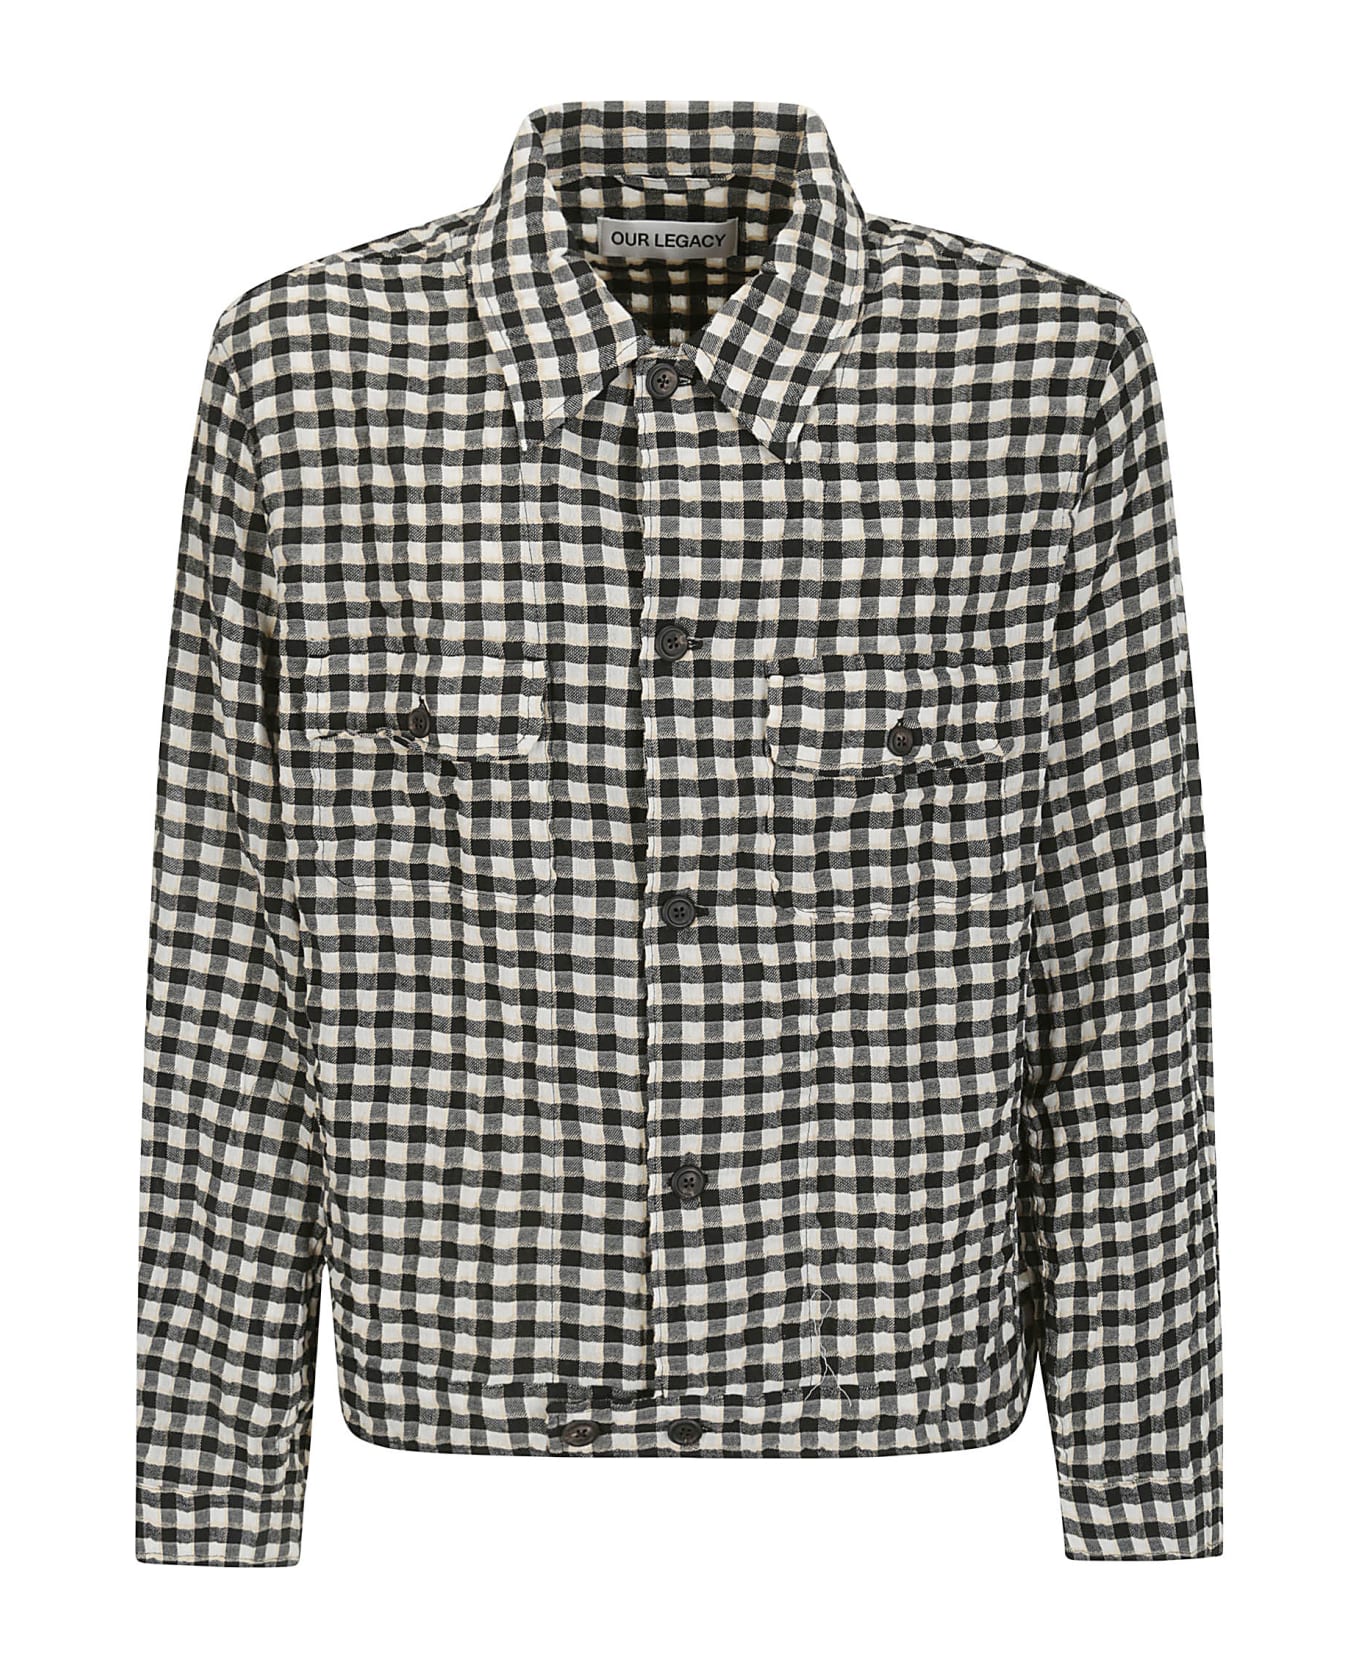 Our Legacy Coach Shirt - WYOMING CHECK CRUBE SEE シャツ